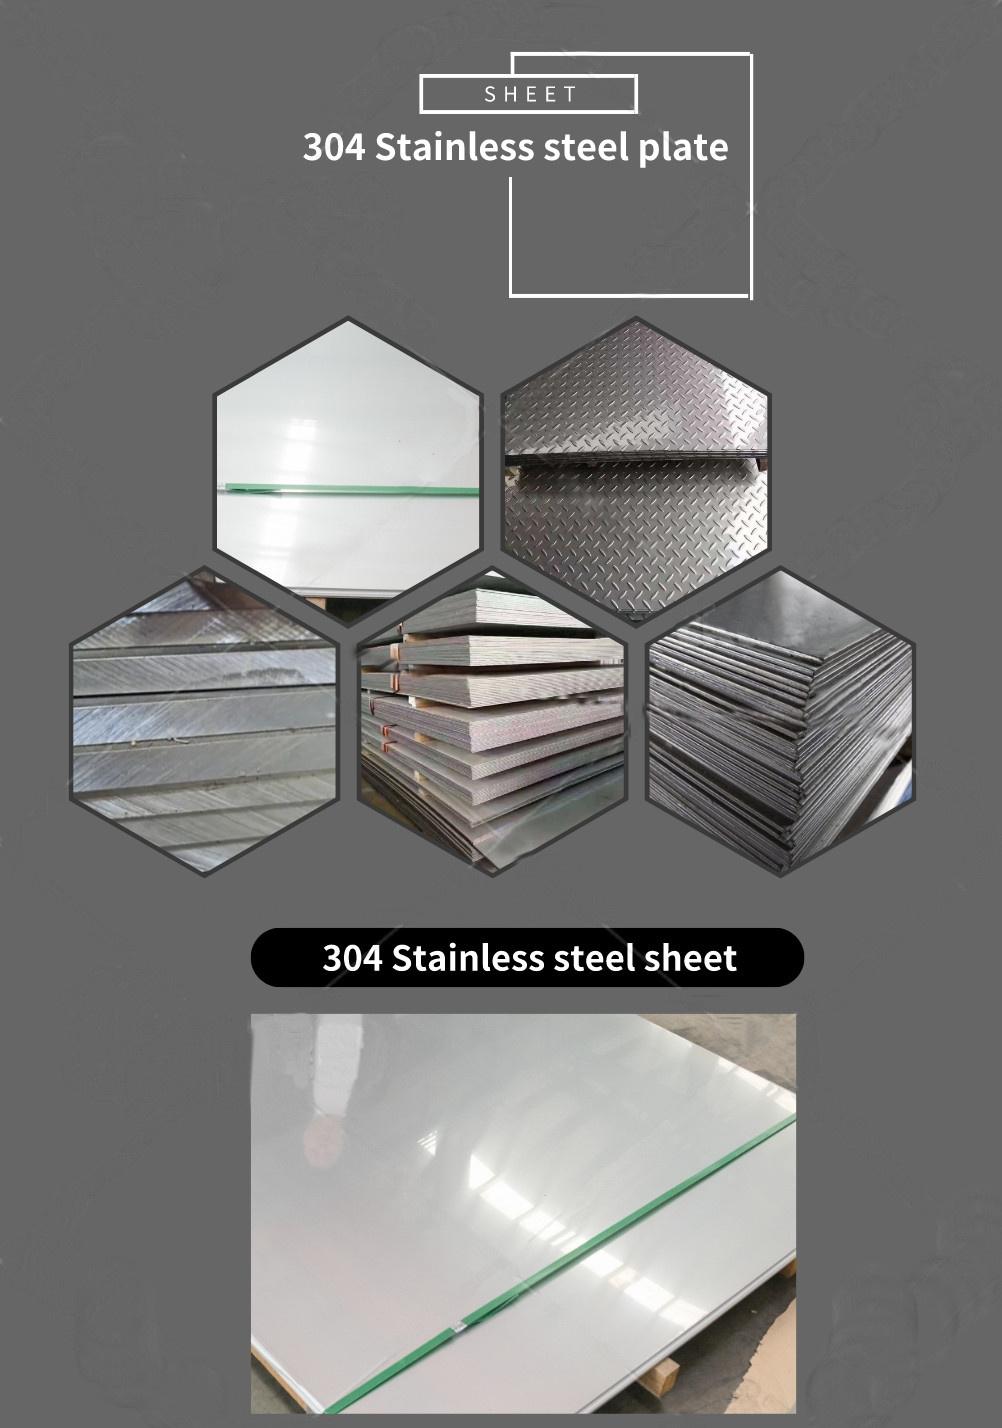 ASTM/GB/JIS 316L 316n Hot Rolled Stainless Steel Plate for Boat Board